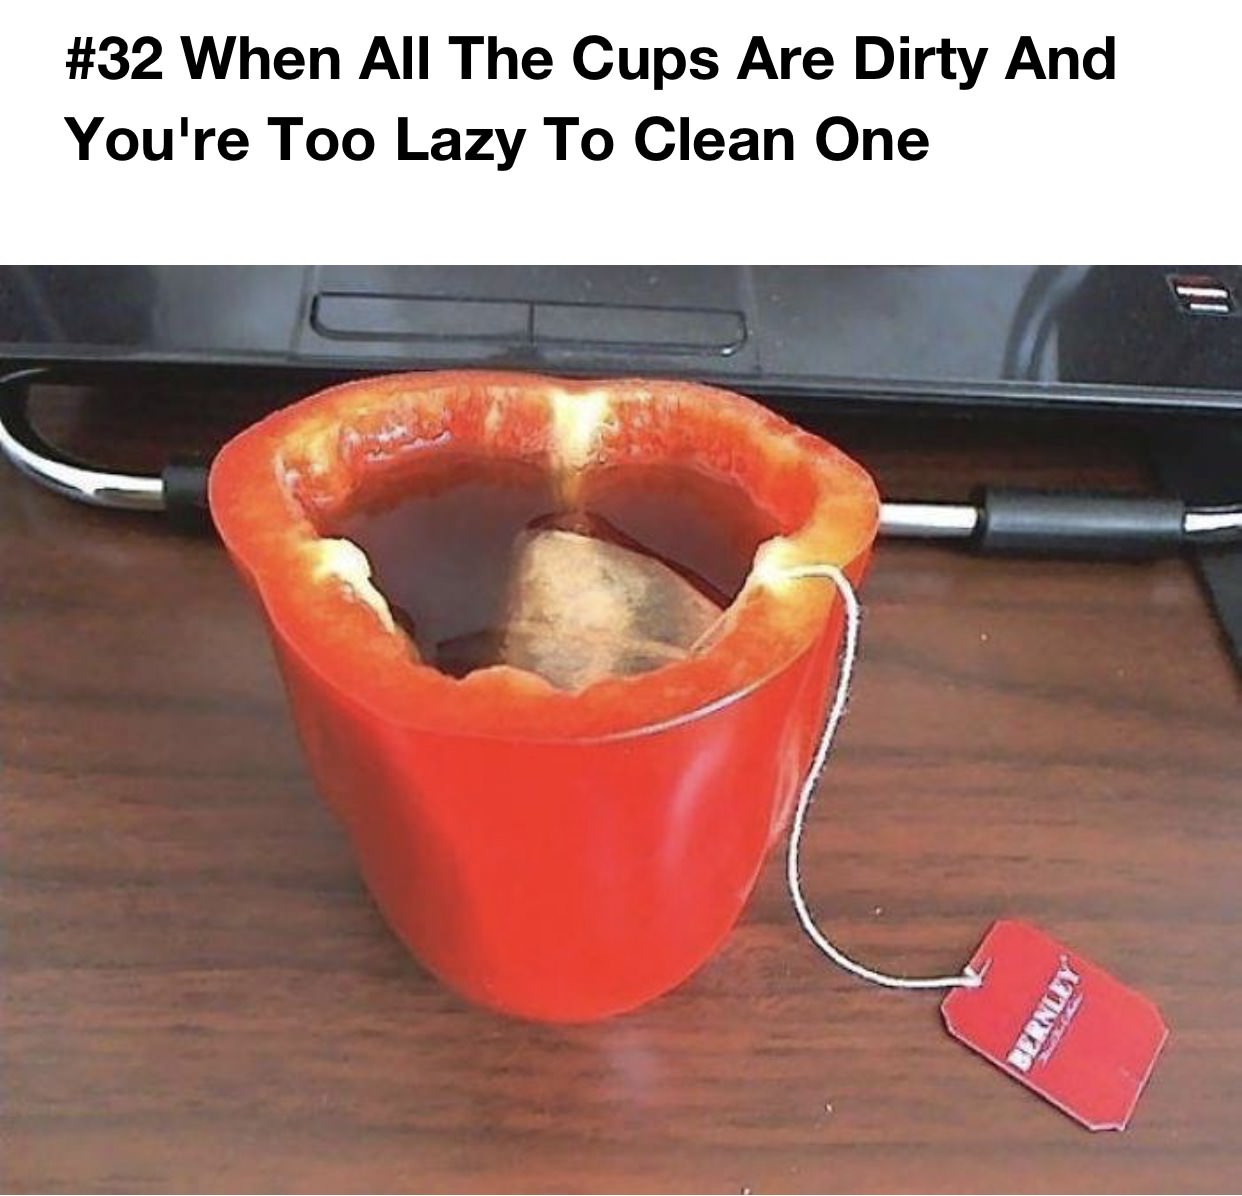 cursed images shitposts - When All The Cups Are Dirty And You're Too Lazy To Clean One